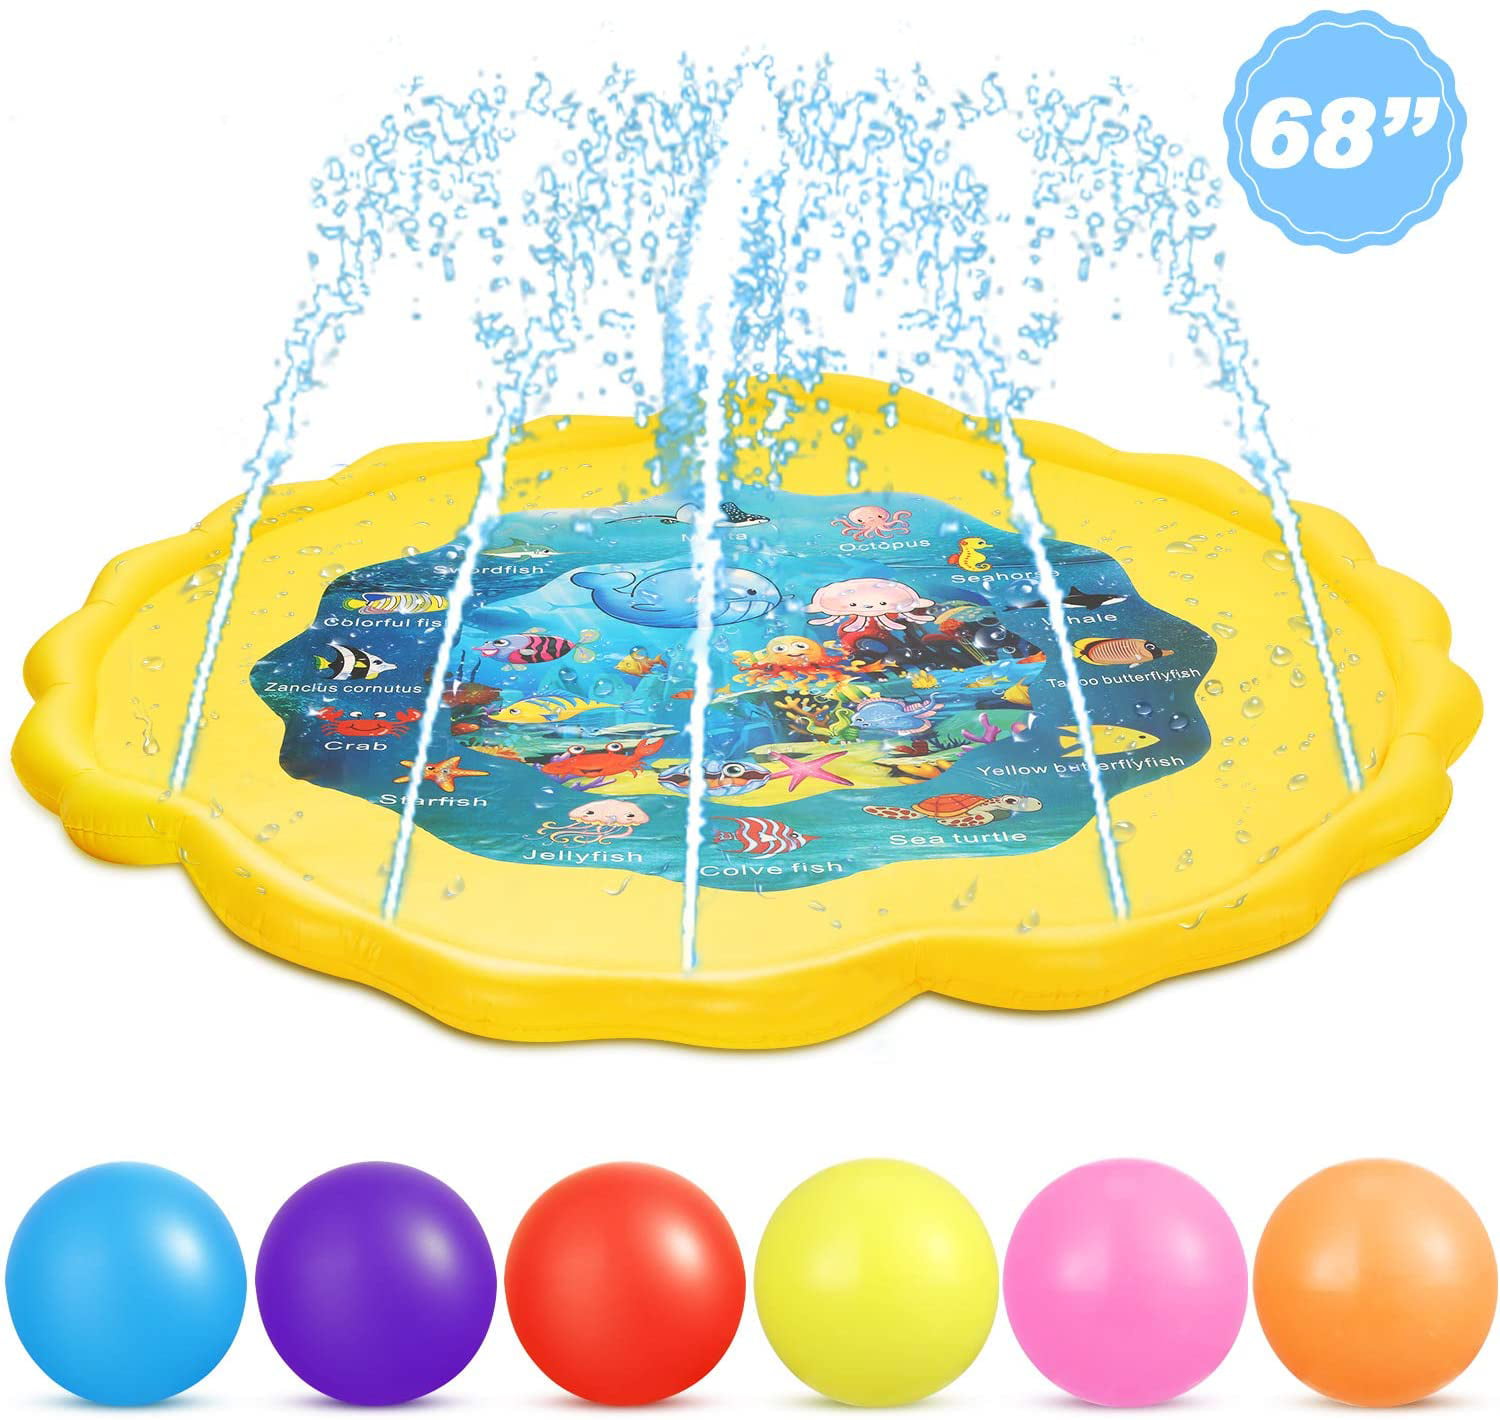 DecorX 69 Inch Splash Pad, Wading Pool for Learning Fun Sprinkle and Splash Play Mat Outside Backyard Water Mat Toys Sprinkle Pool and 6 Ocean Balls for Summer Outdoor Party